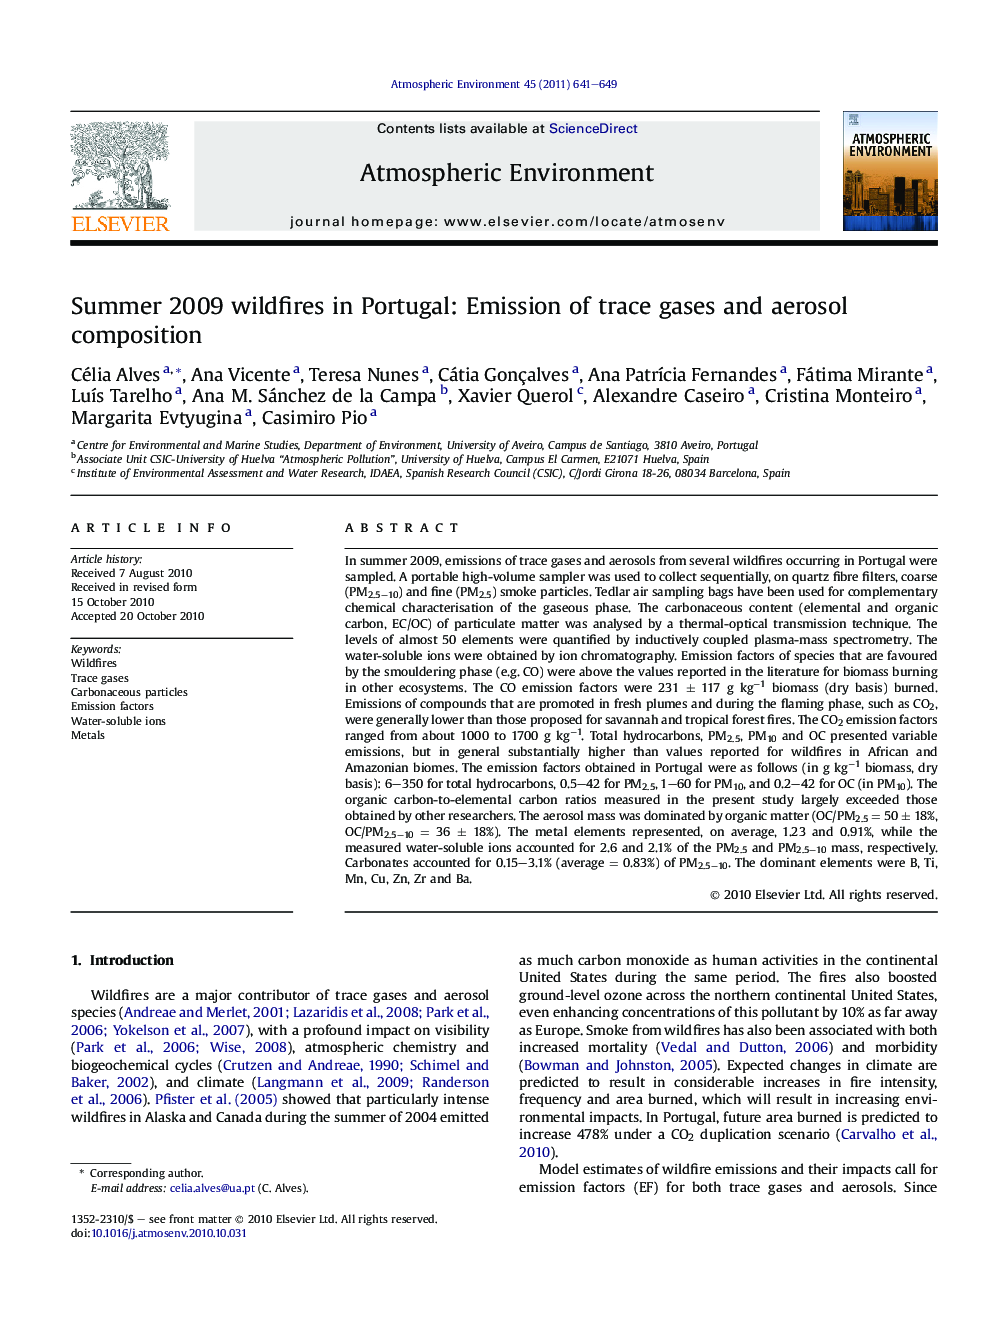 Summer 2009 wildfires in Portugal: Emission of trace gases and aerosol composition